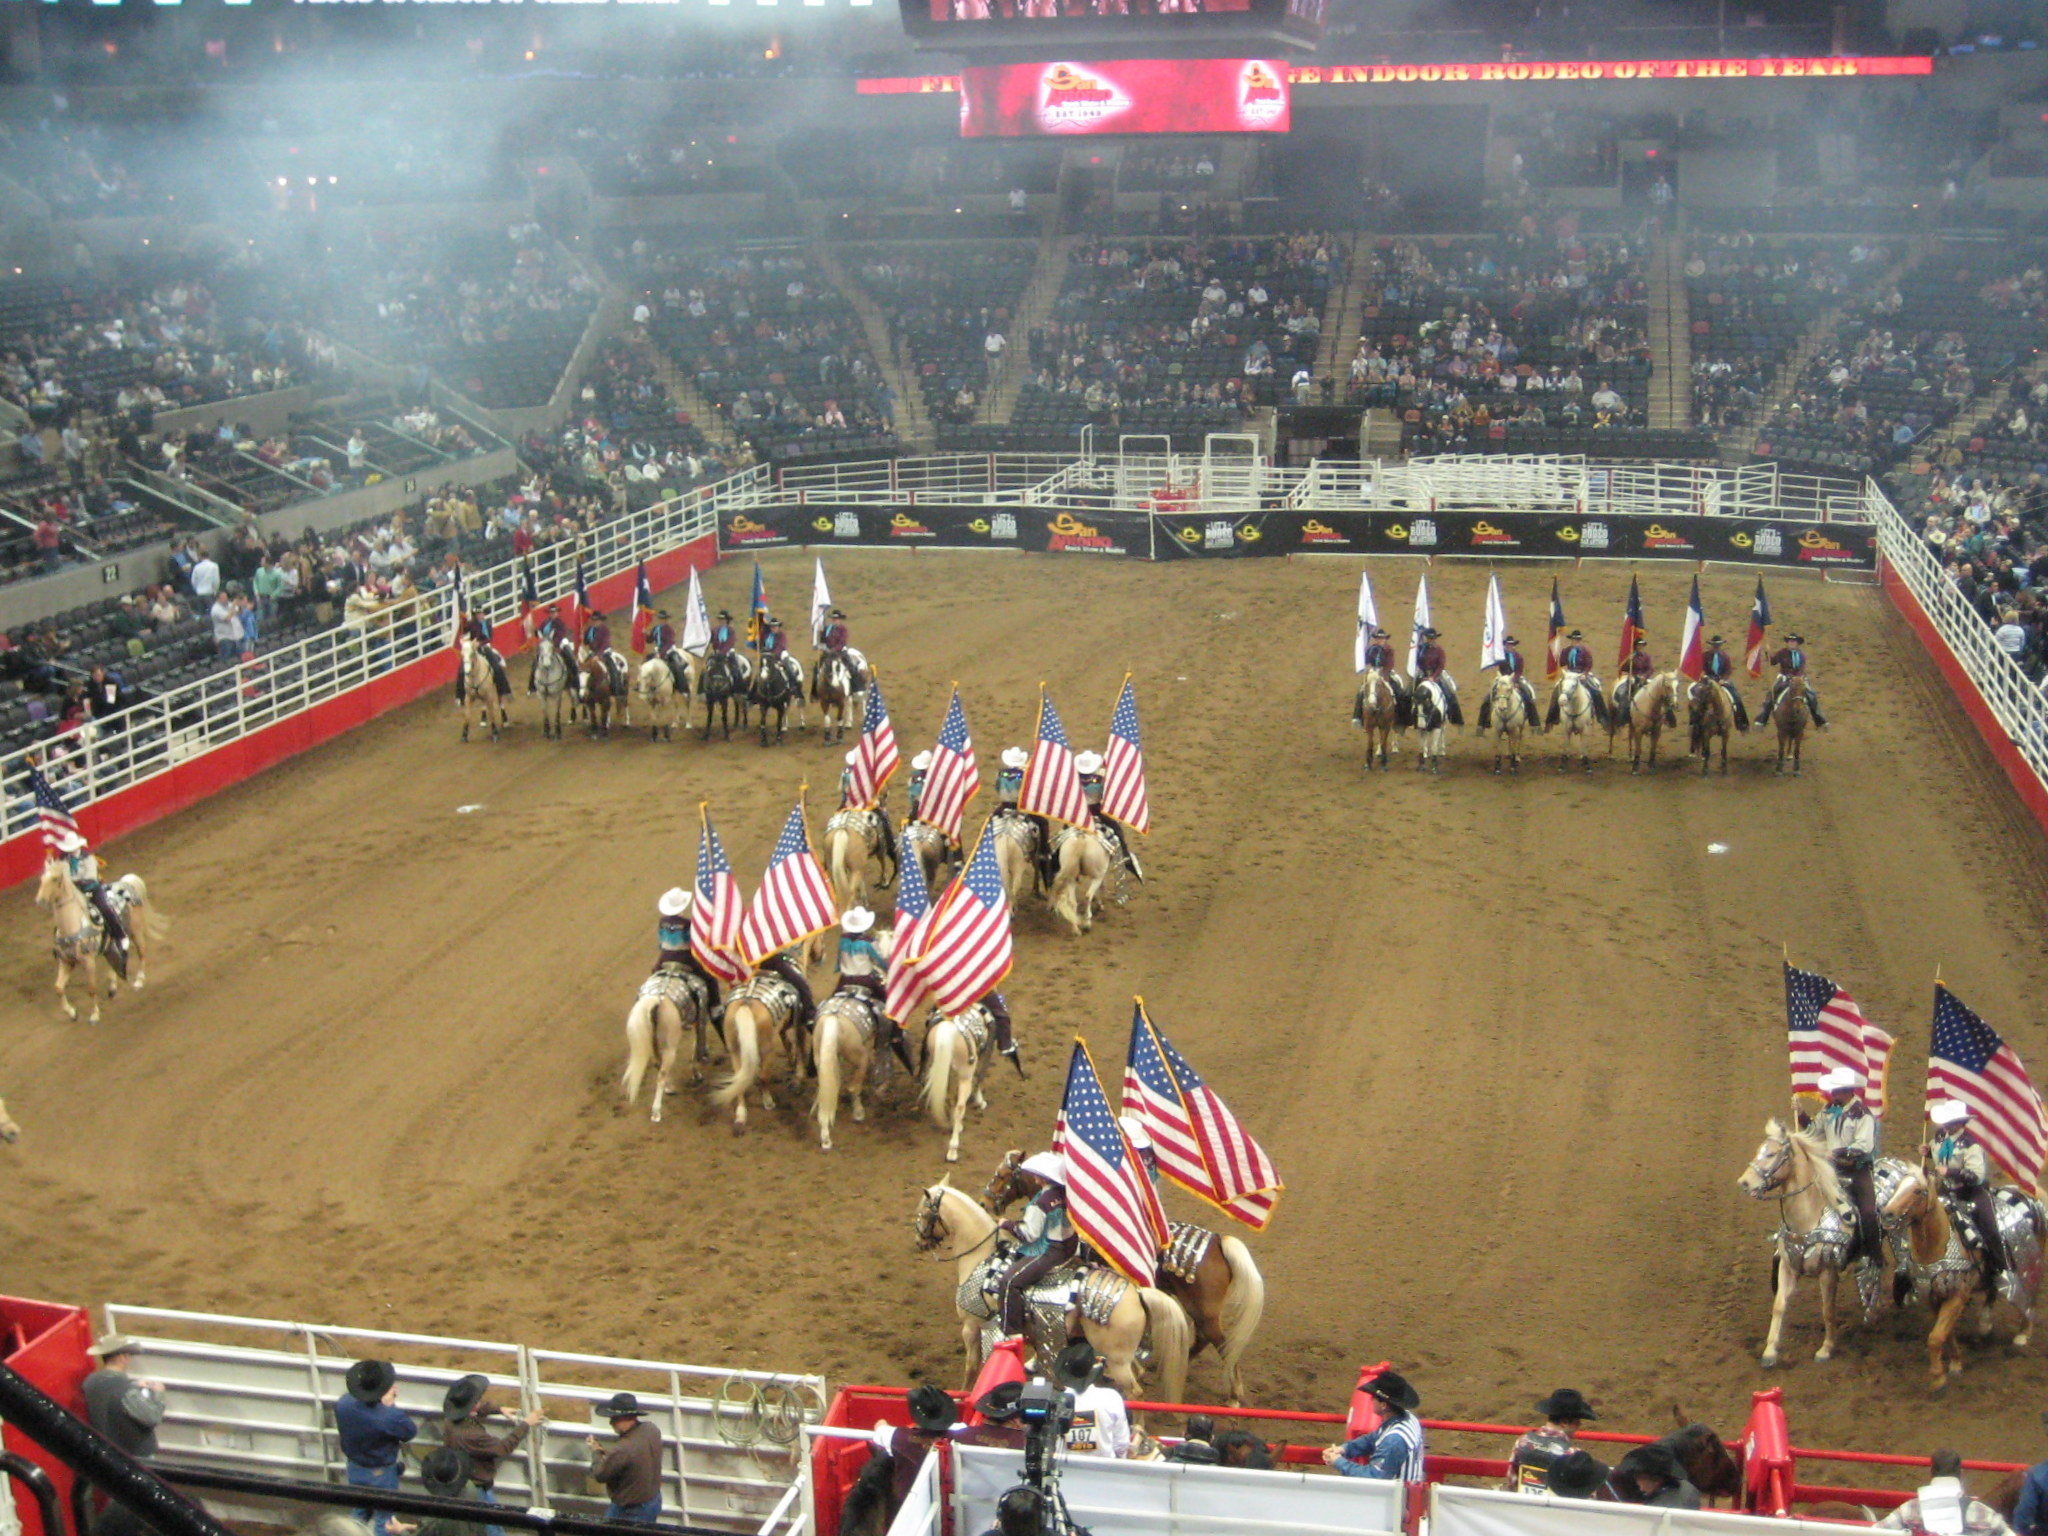 Horses parading in rodeo ring